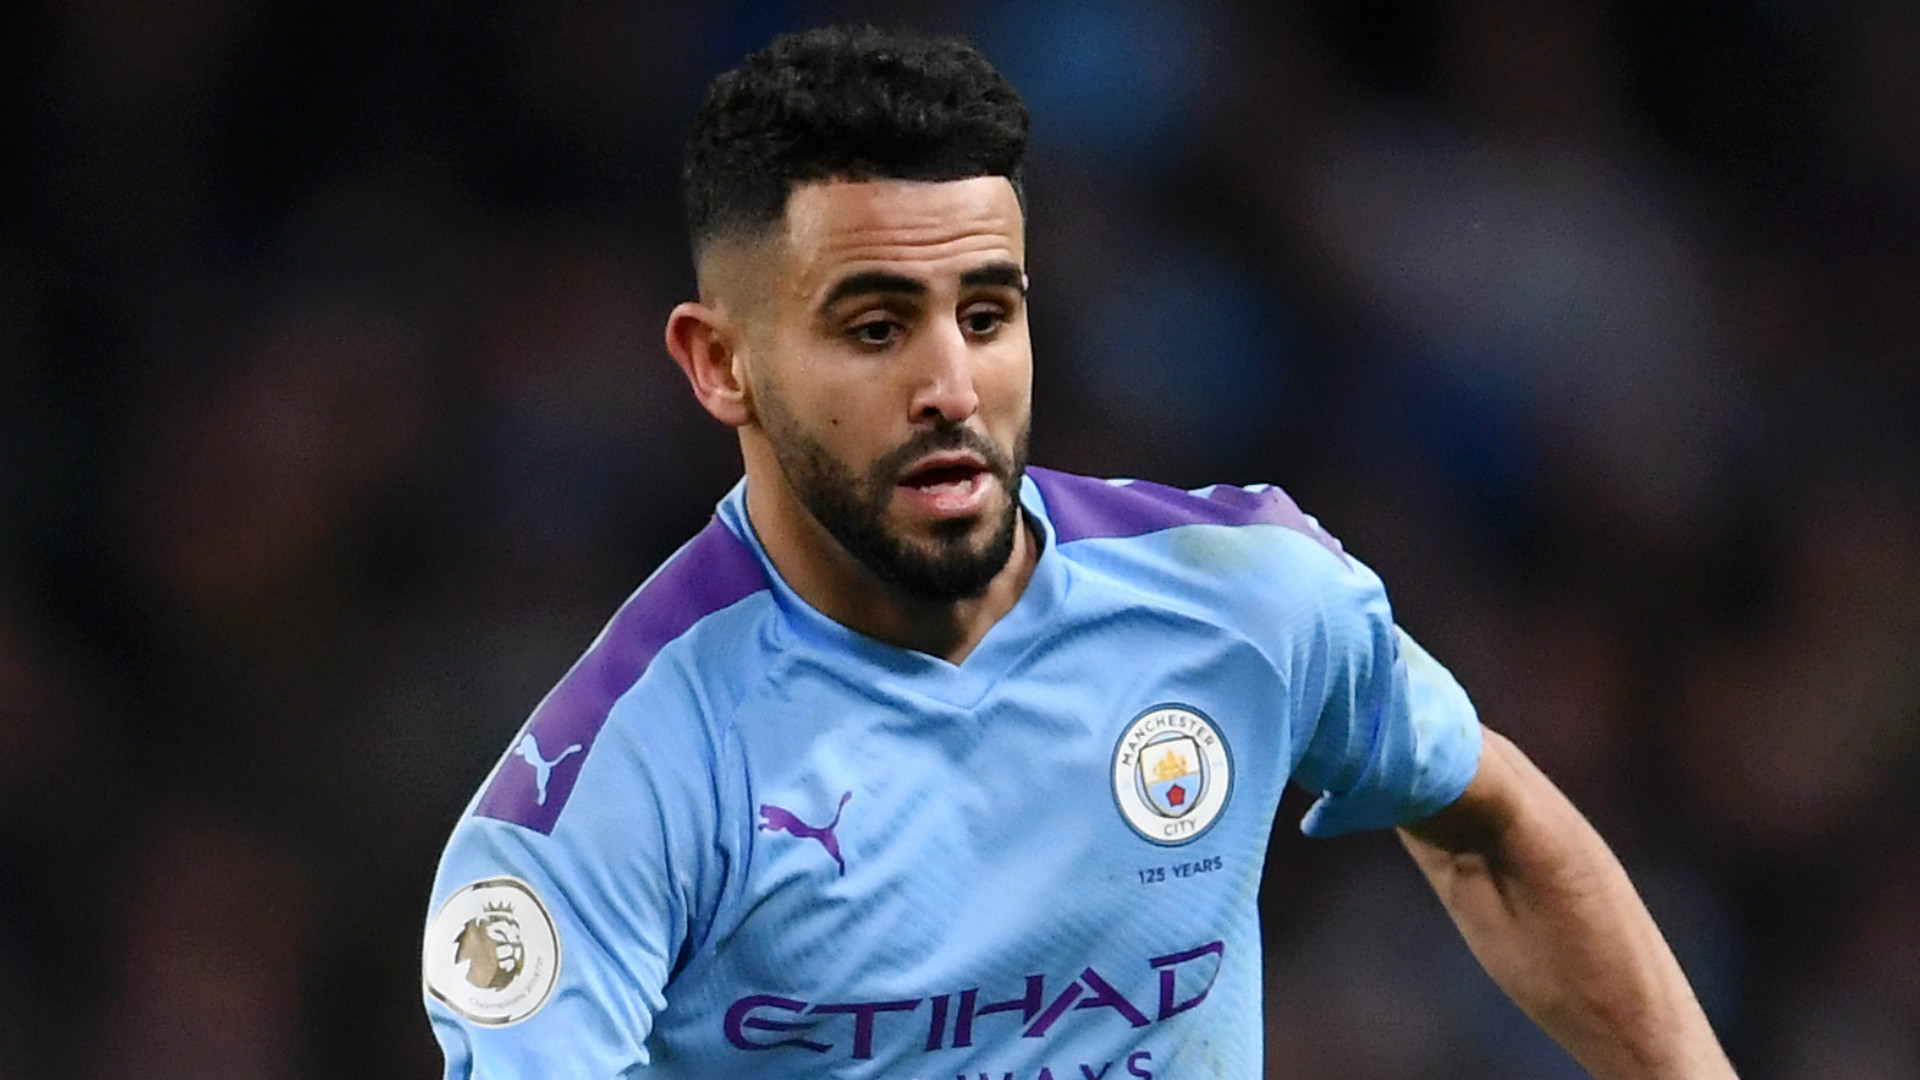 ‘We want to win every game’ – Mahrez reacts to Manchester City FA Cup quarter-final progress